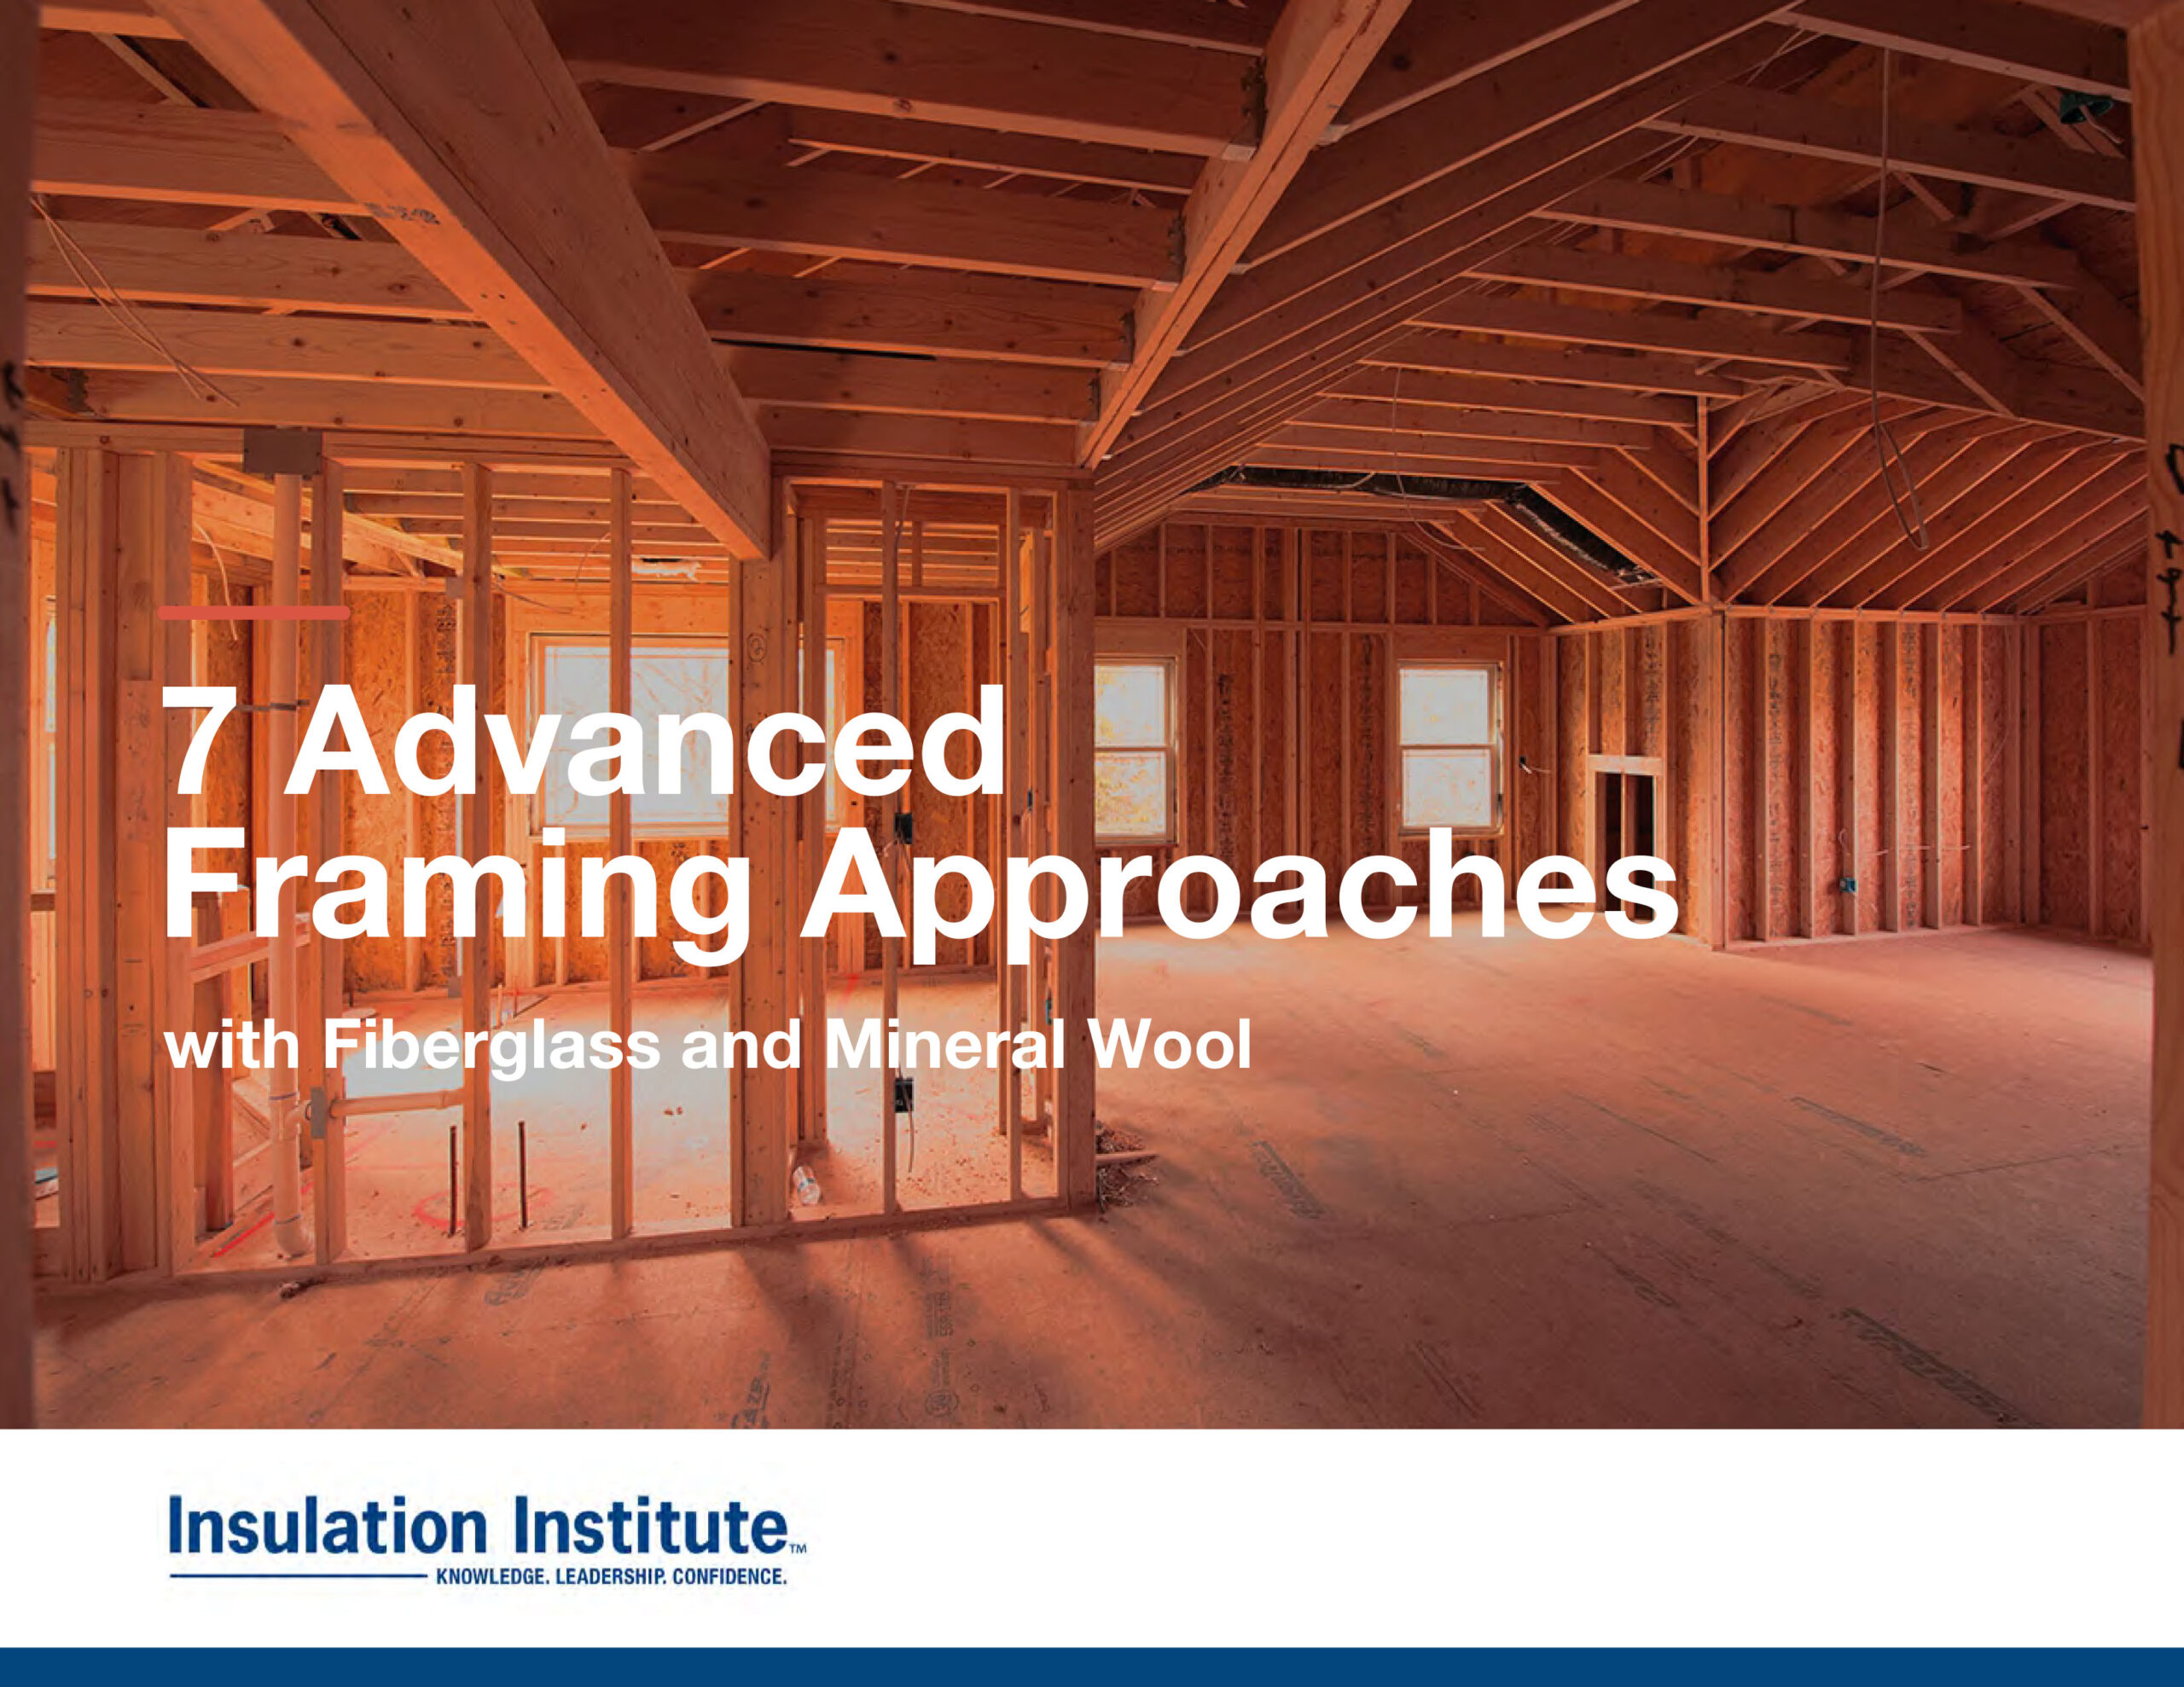 New Release: Advanced Framing with Fiberglass & Mineral Wool